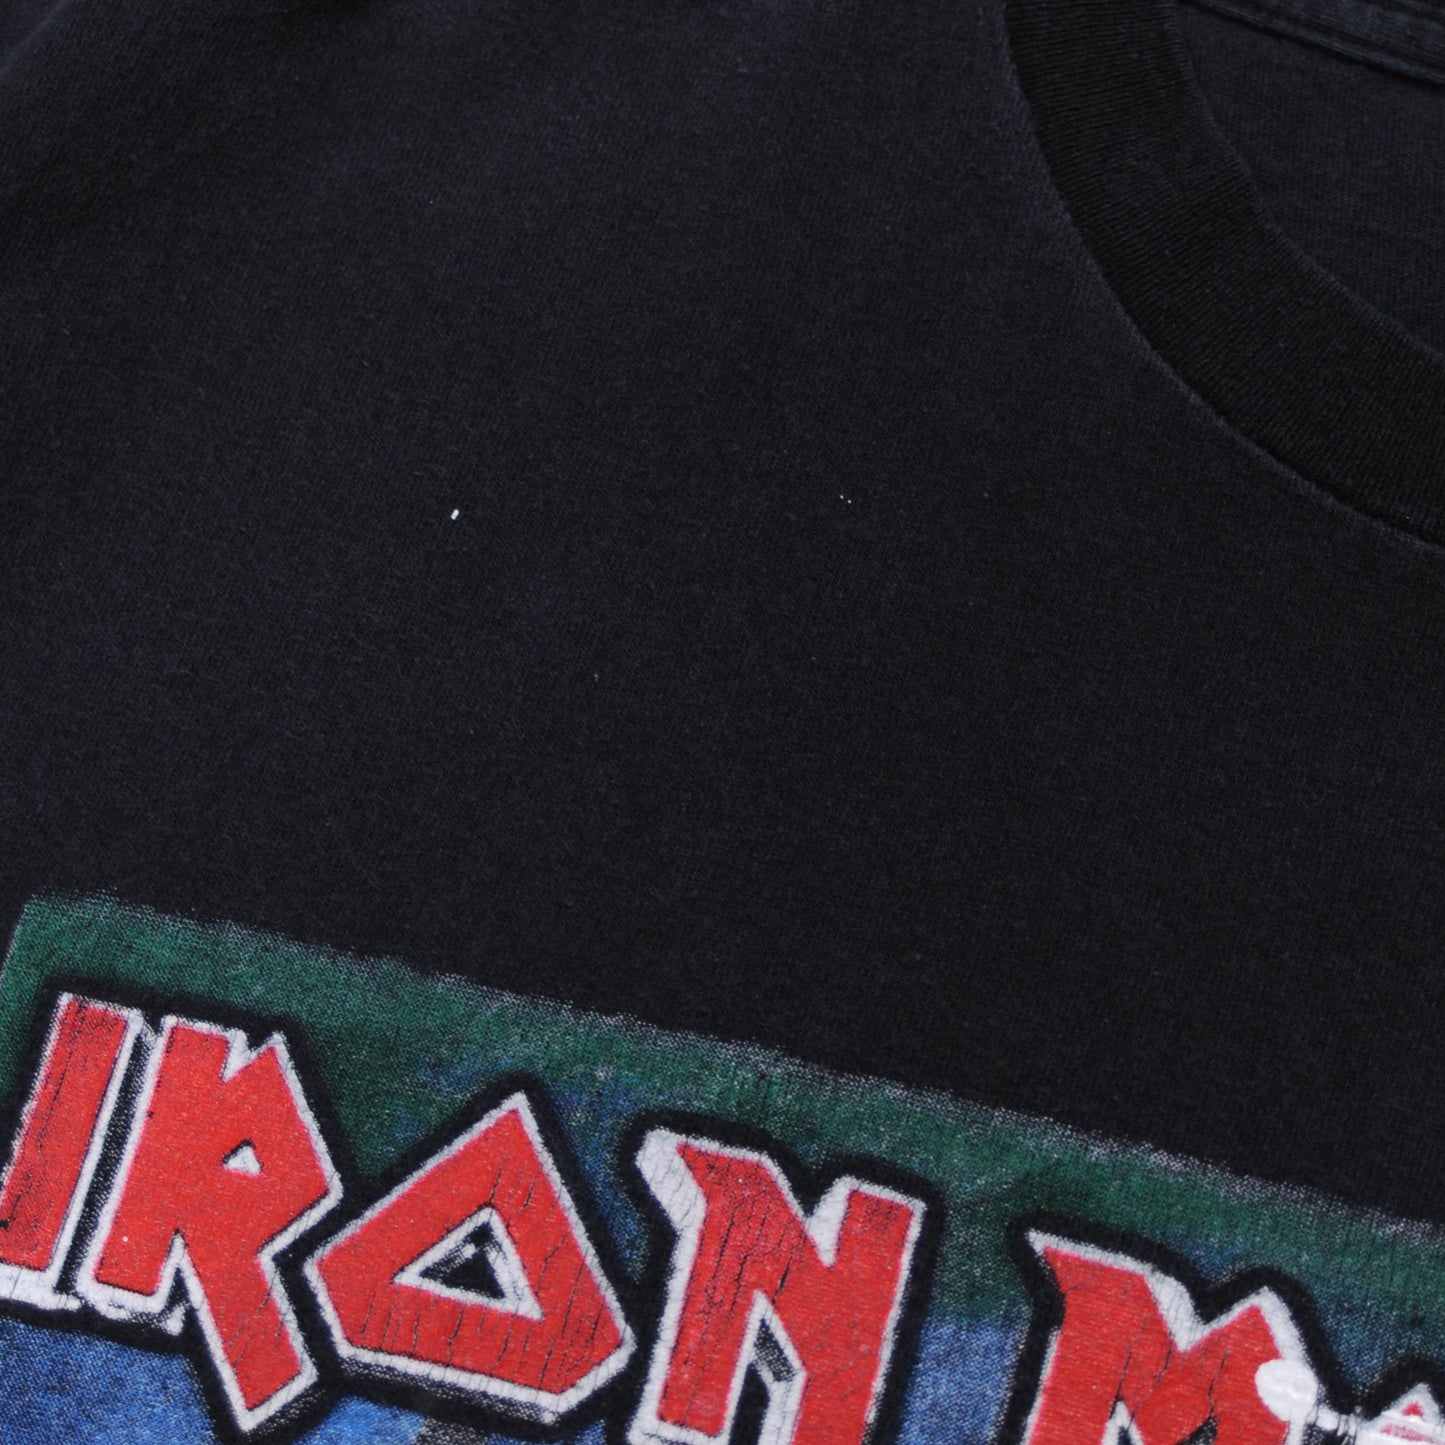 00's IRON MAIDEN 2006World Tour Tシャツ/A3101T-S